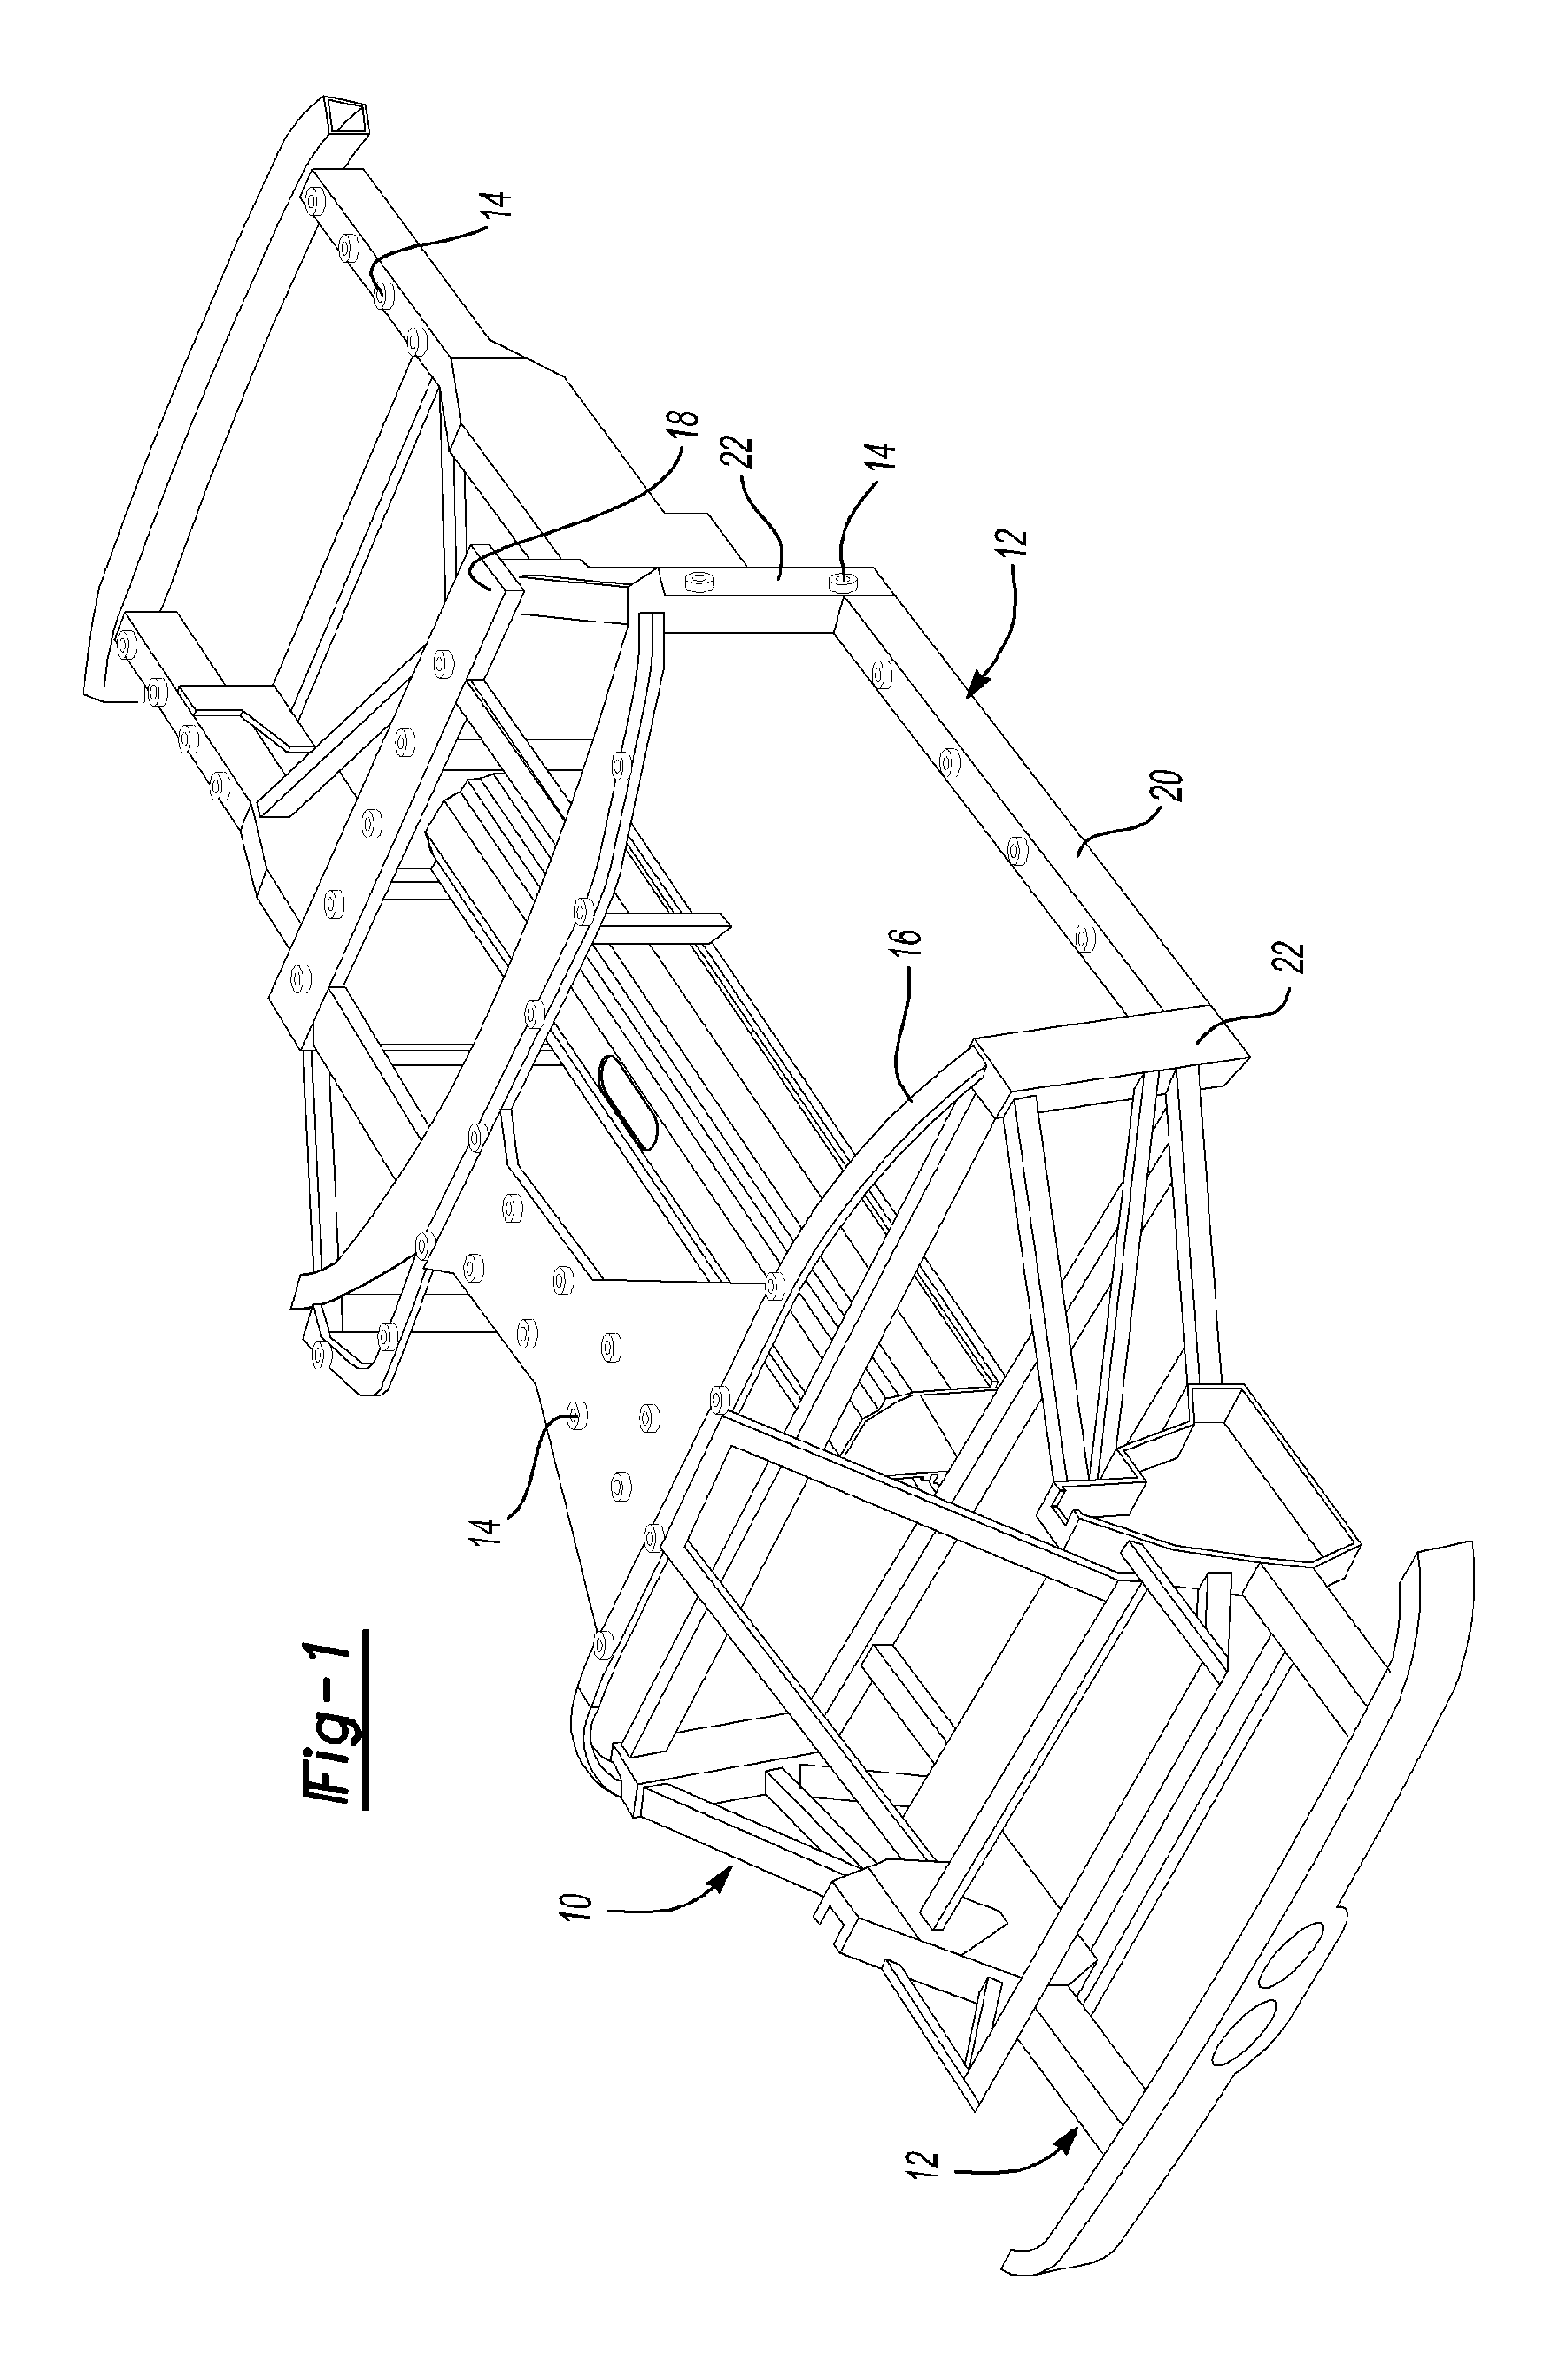 Rivet nut with machinable head and method of making a vehicle body